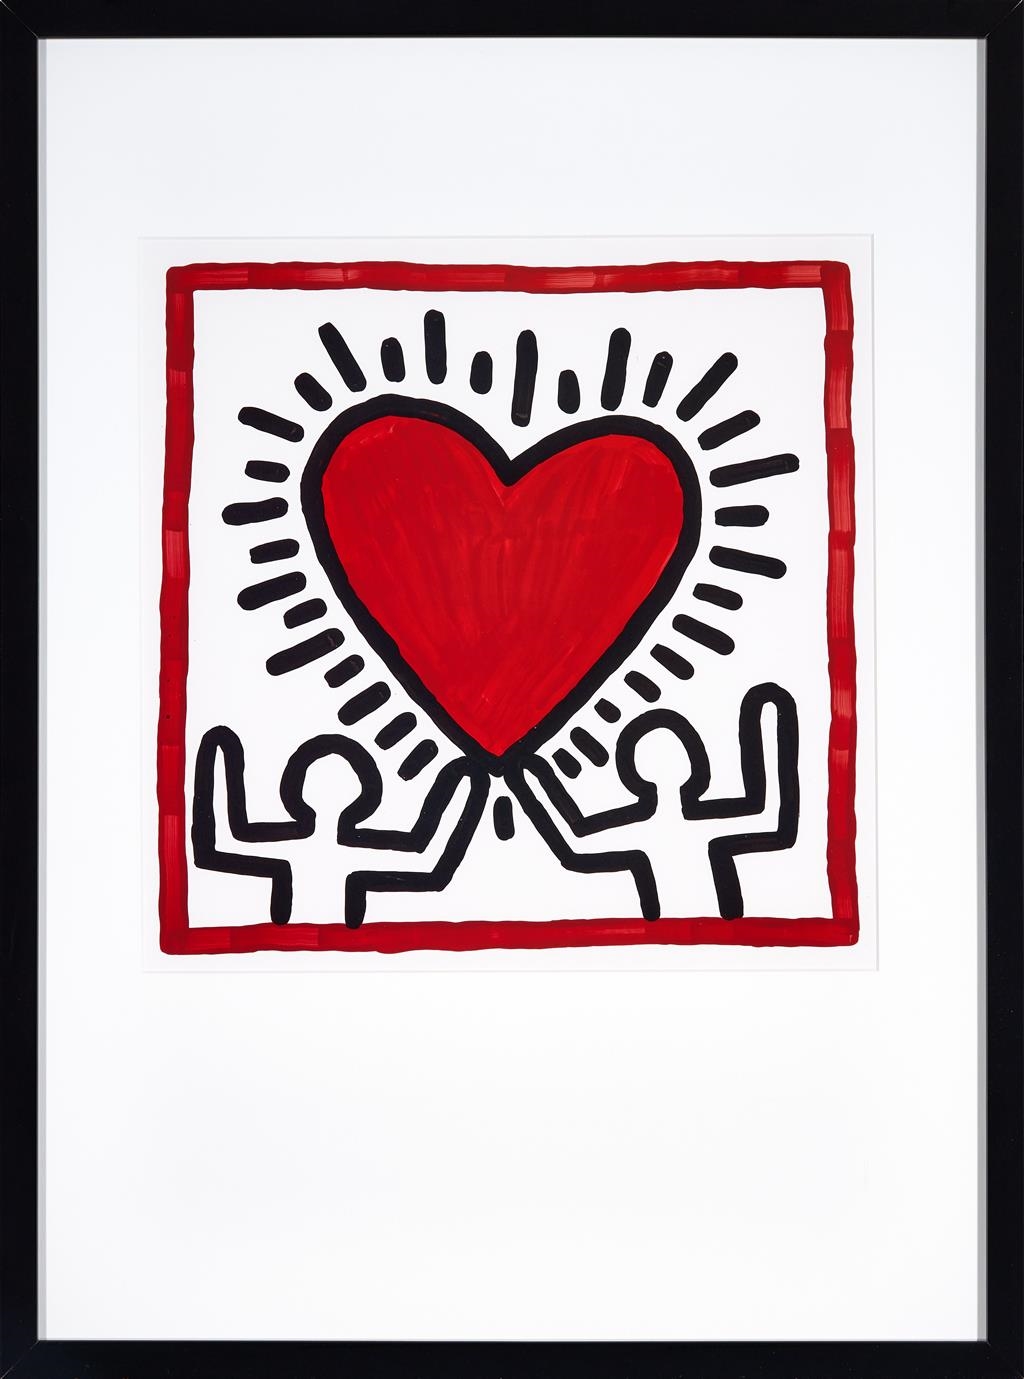 Artwork by Keith Haring, Untitled (Heart), Made of print